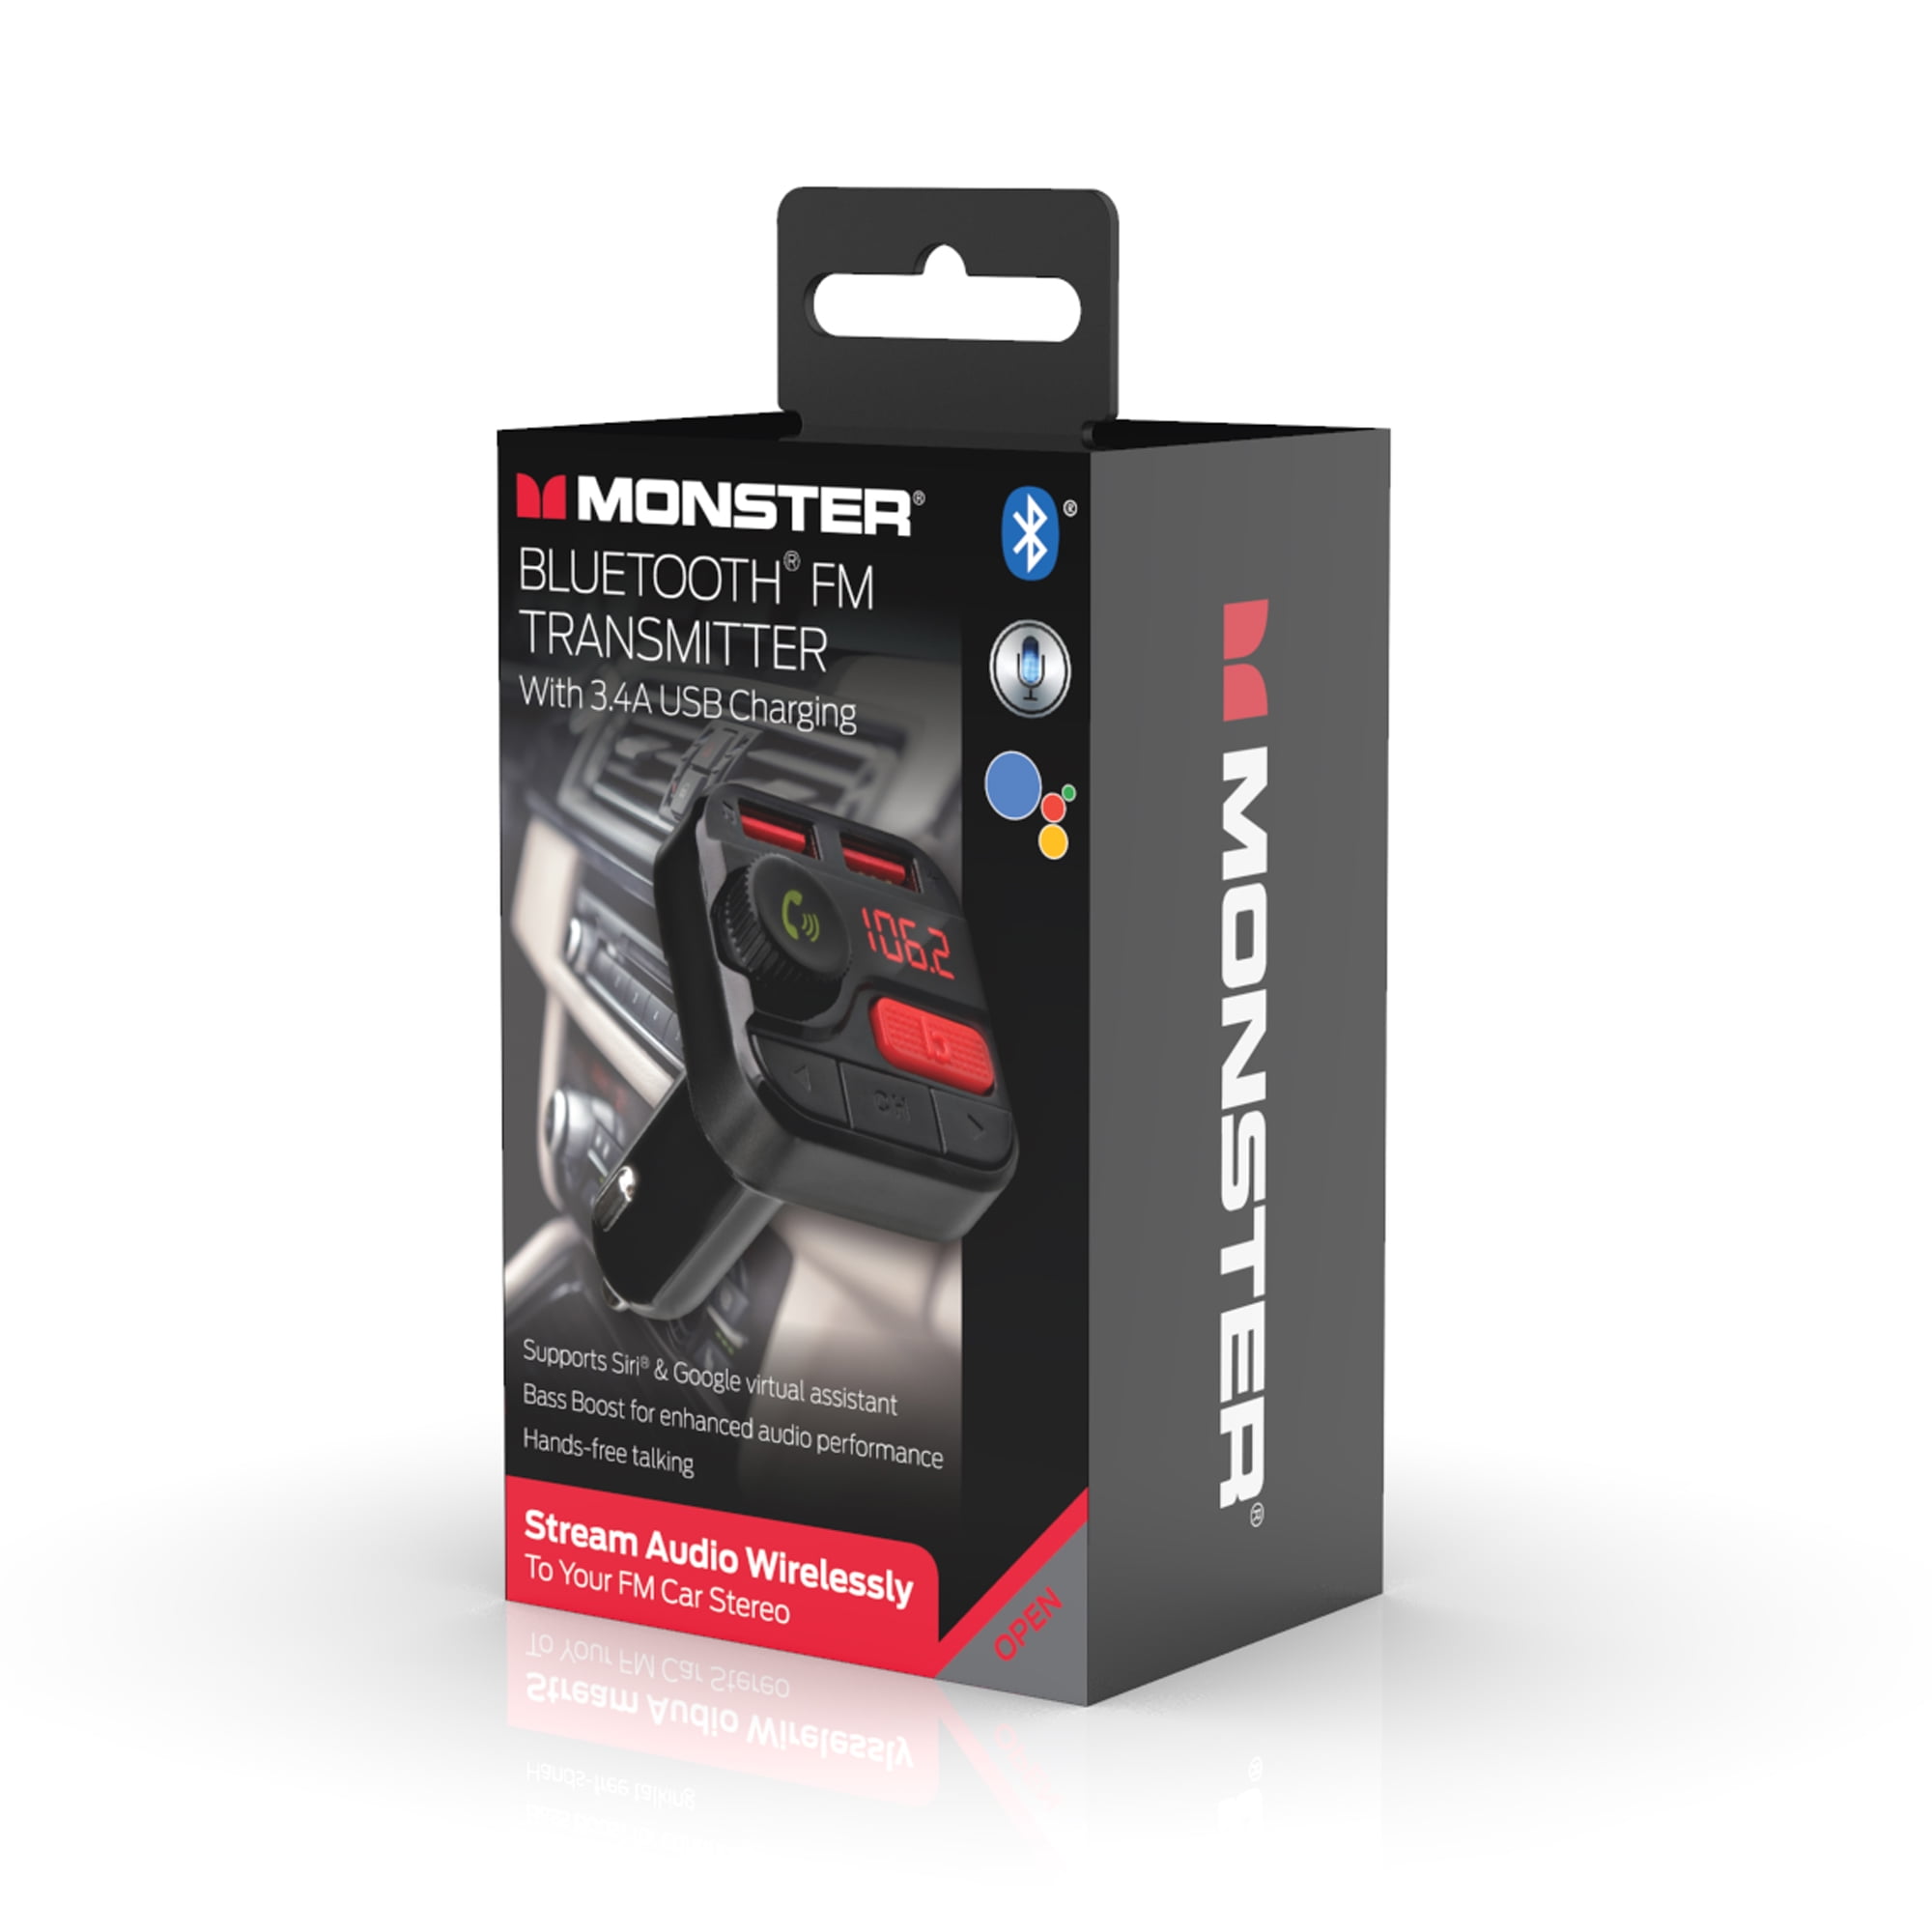 Bluetooth FM Transmitter With 3.4 Amp Charging Ports, Simultaneous Charging  - Monster Illuminessence